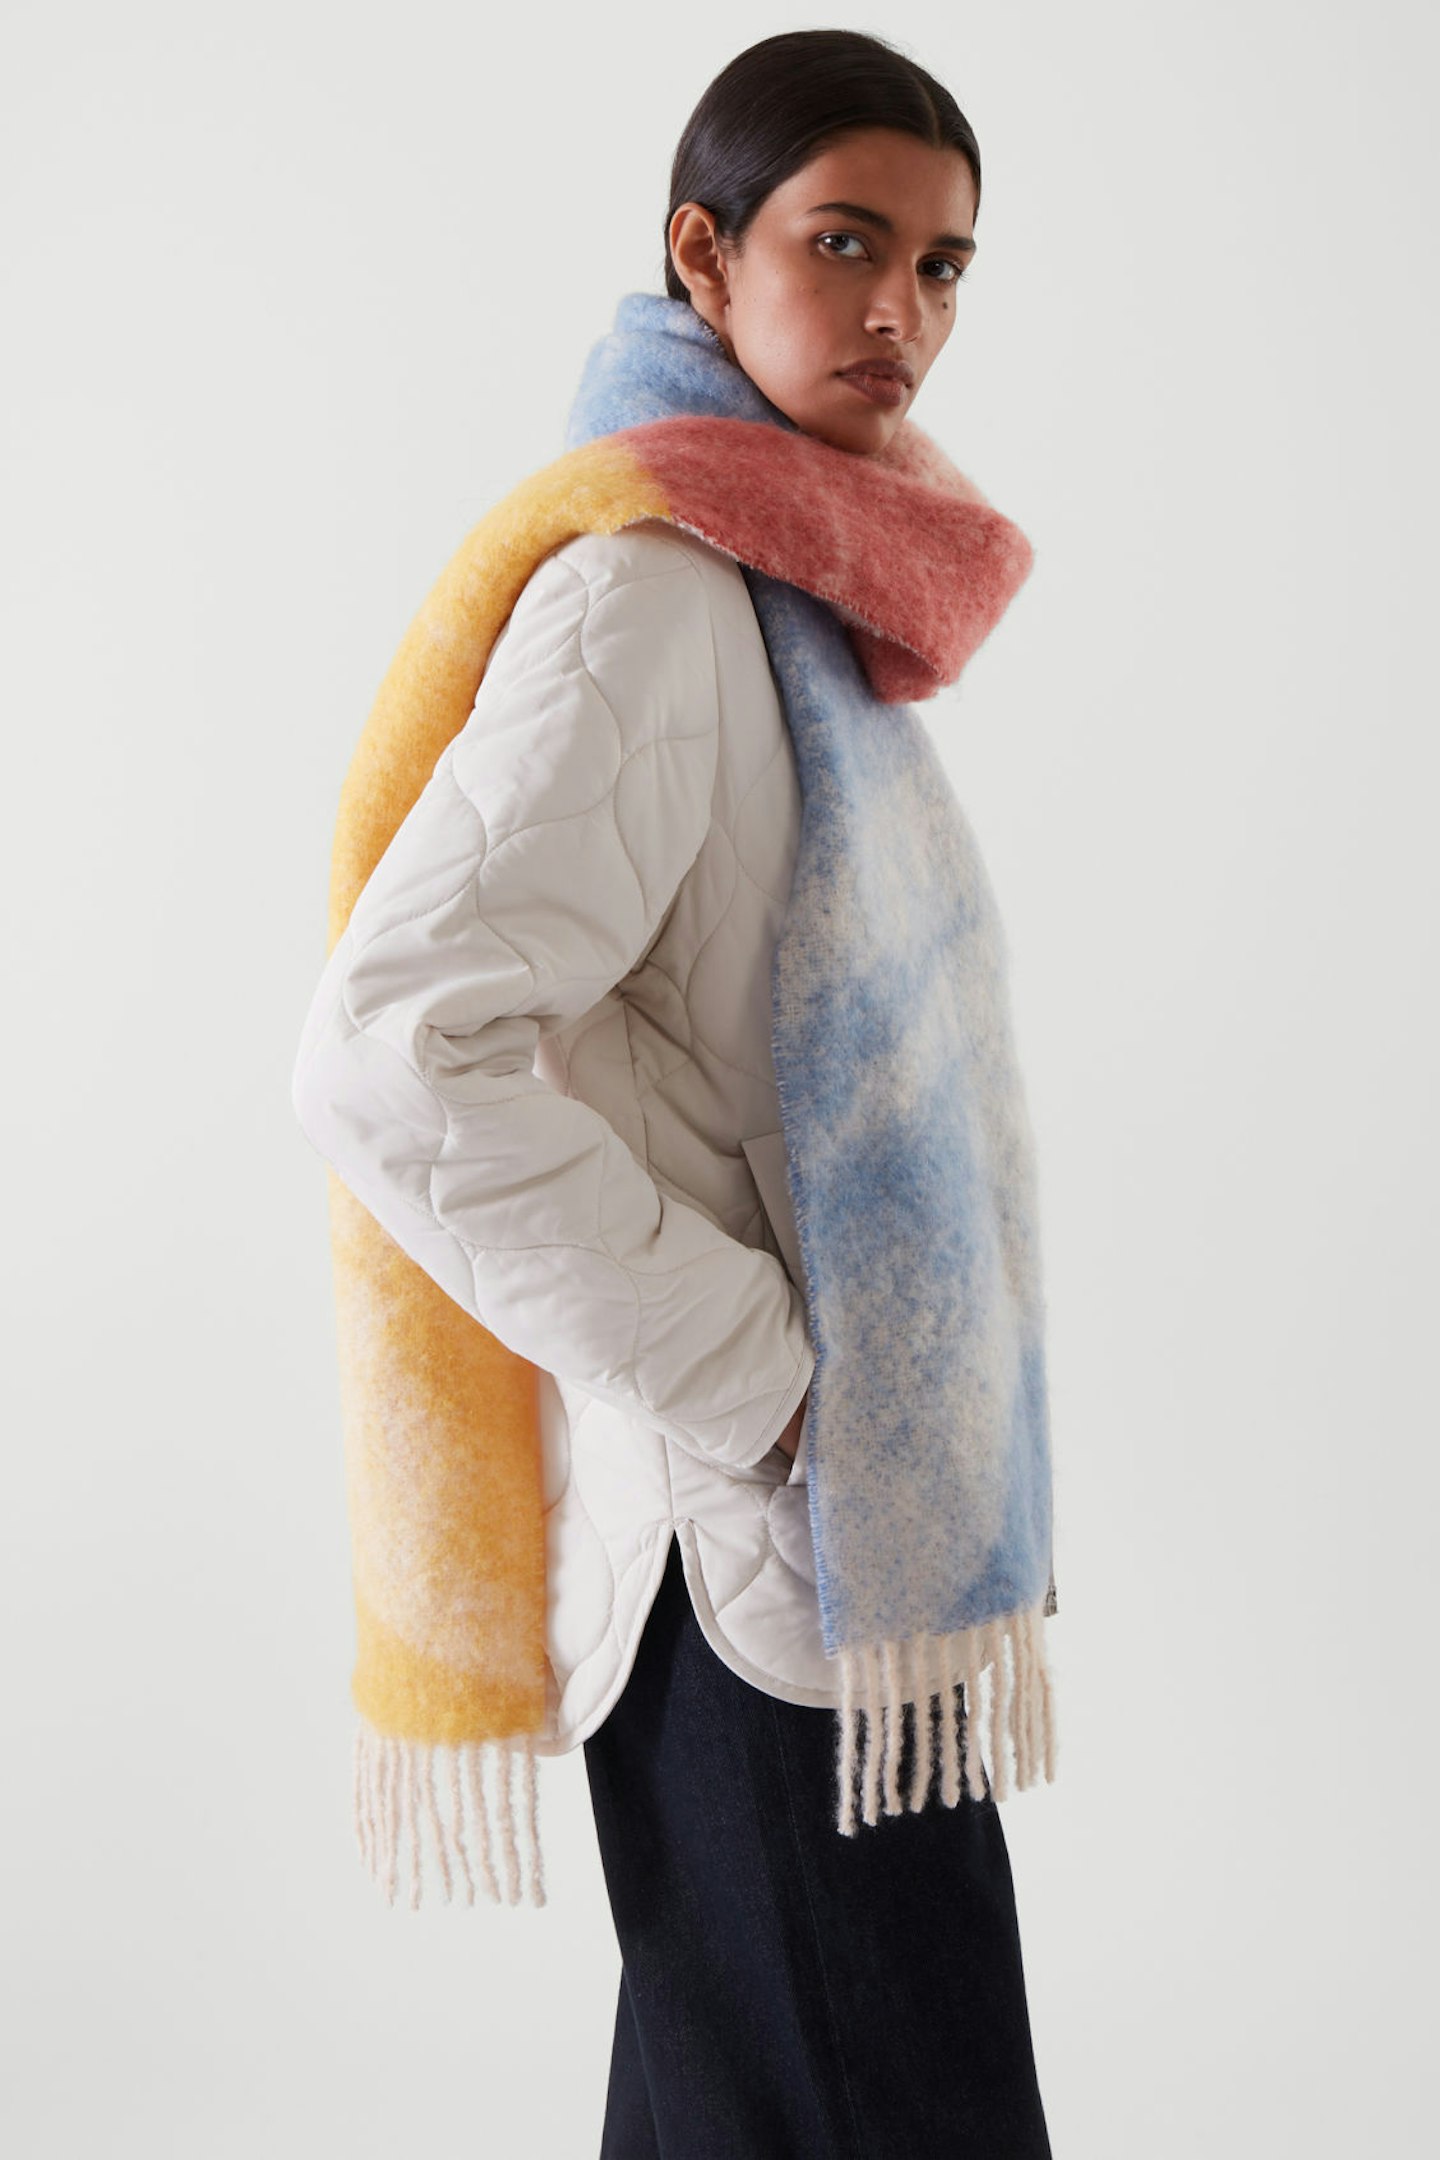 COS, Oversized Scarf, £79